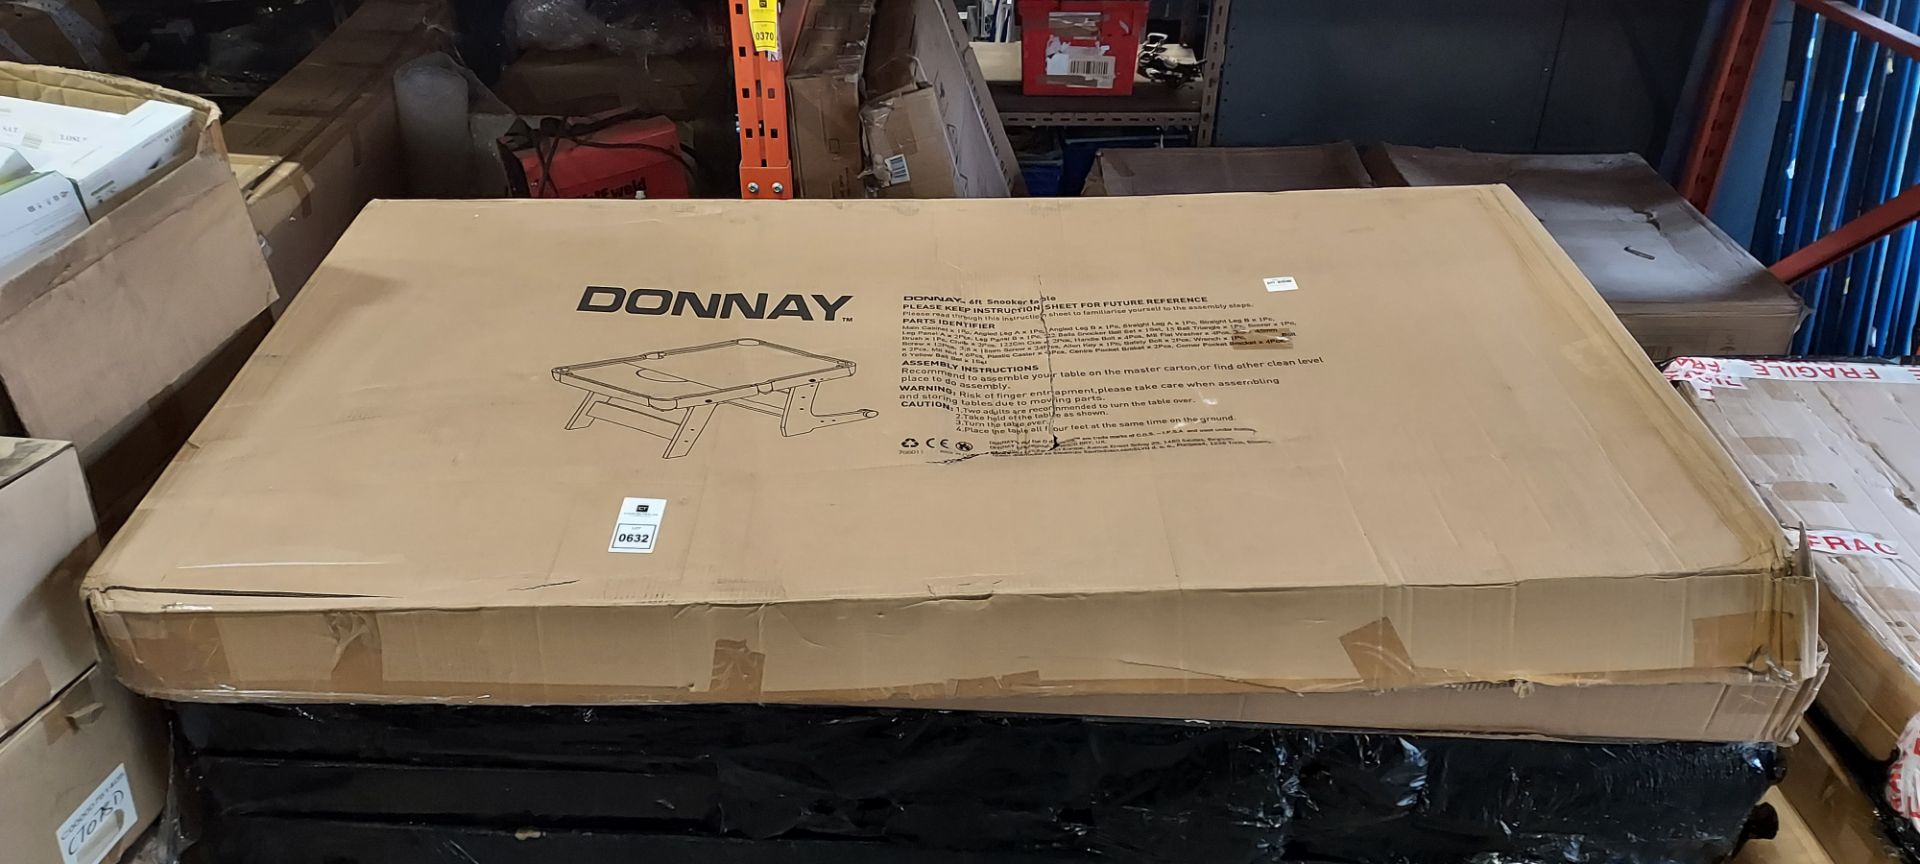 7 X DONNAY 6FT SNOOKER TABLE ON A FULL PALLET (NOTE CUSTOMER RETURNS) - Image 2 of 2